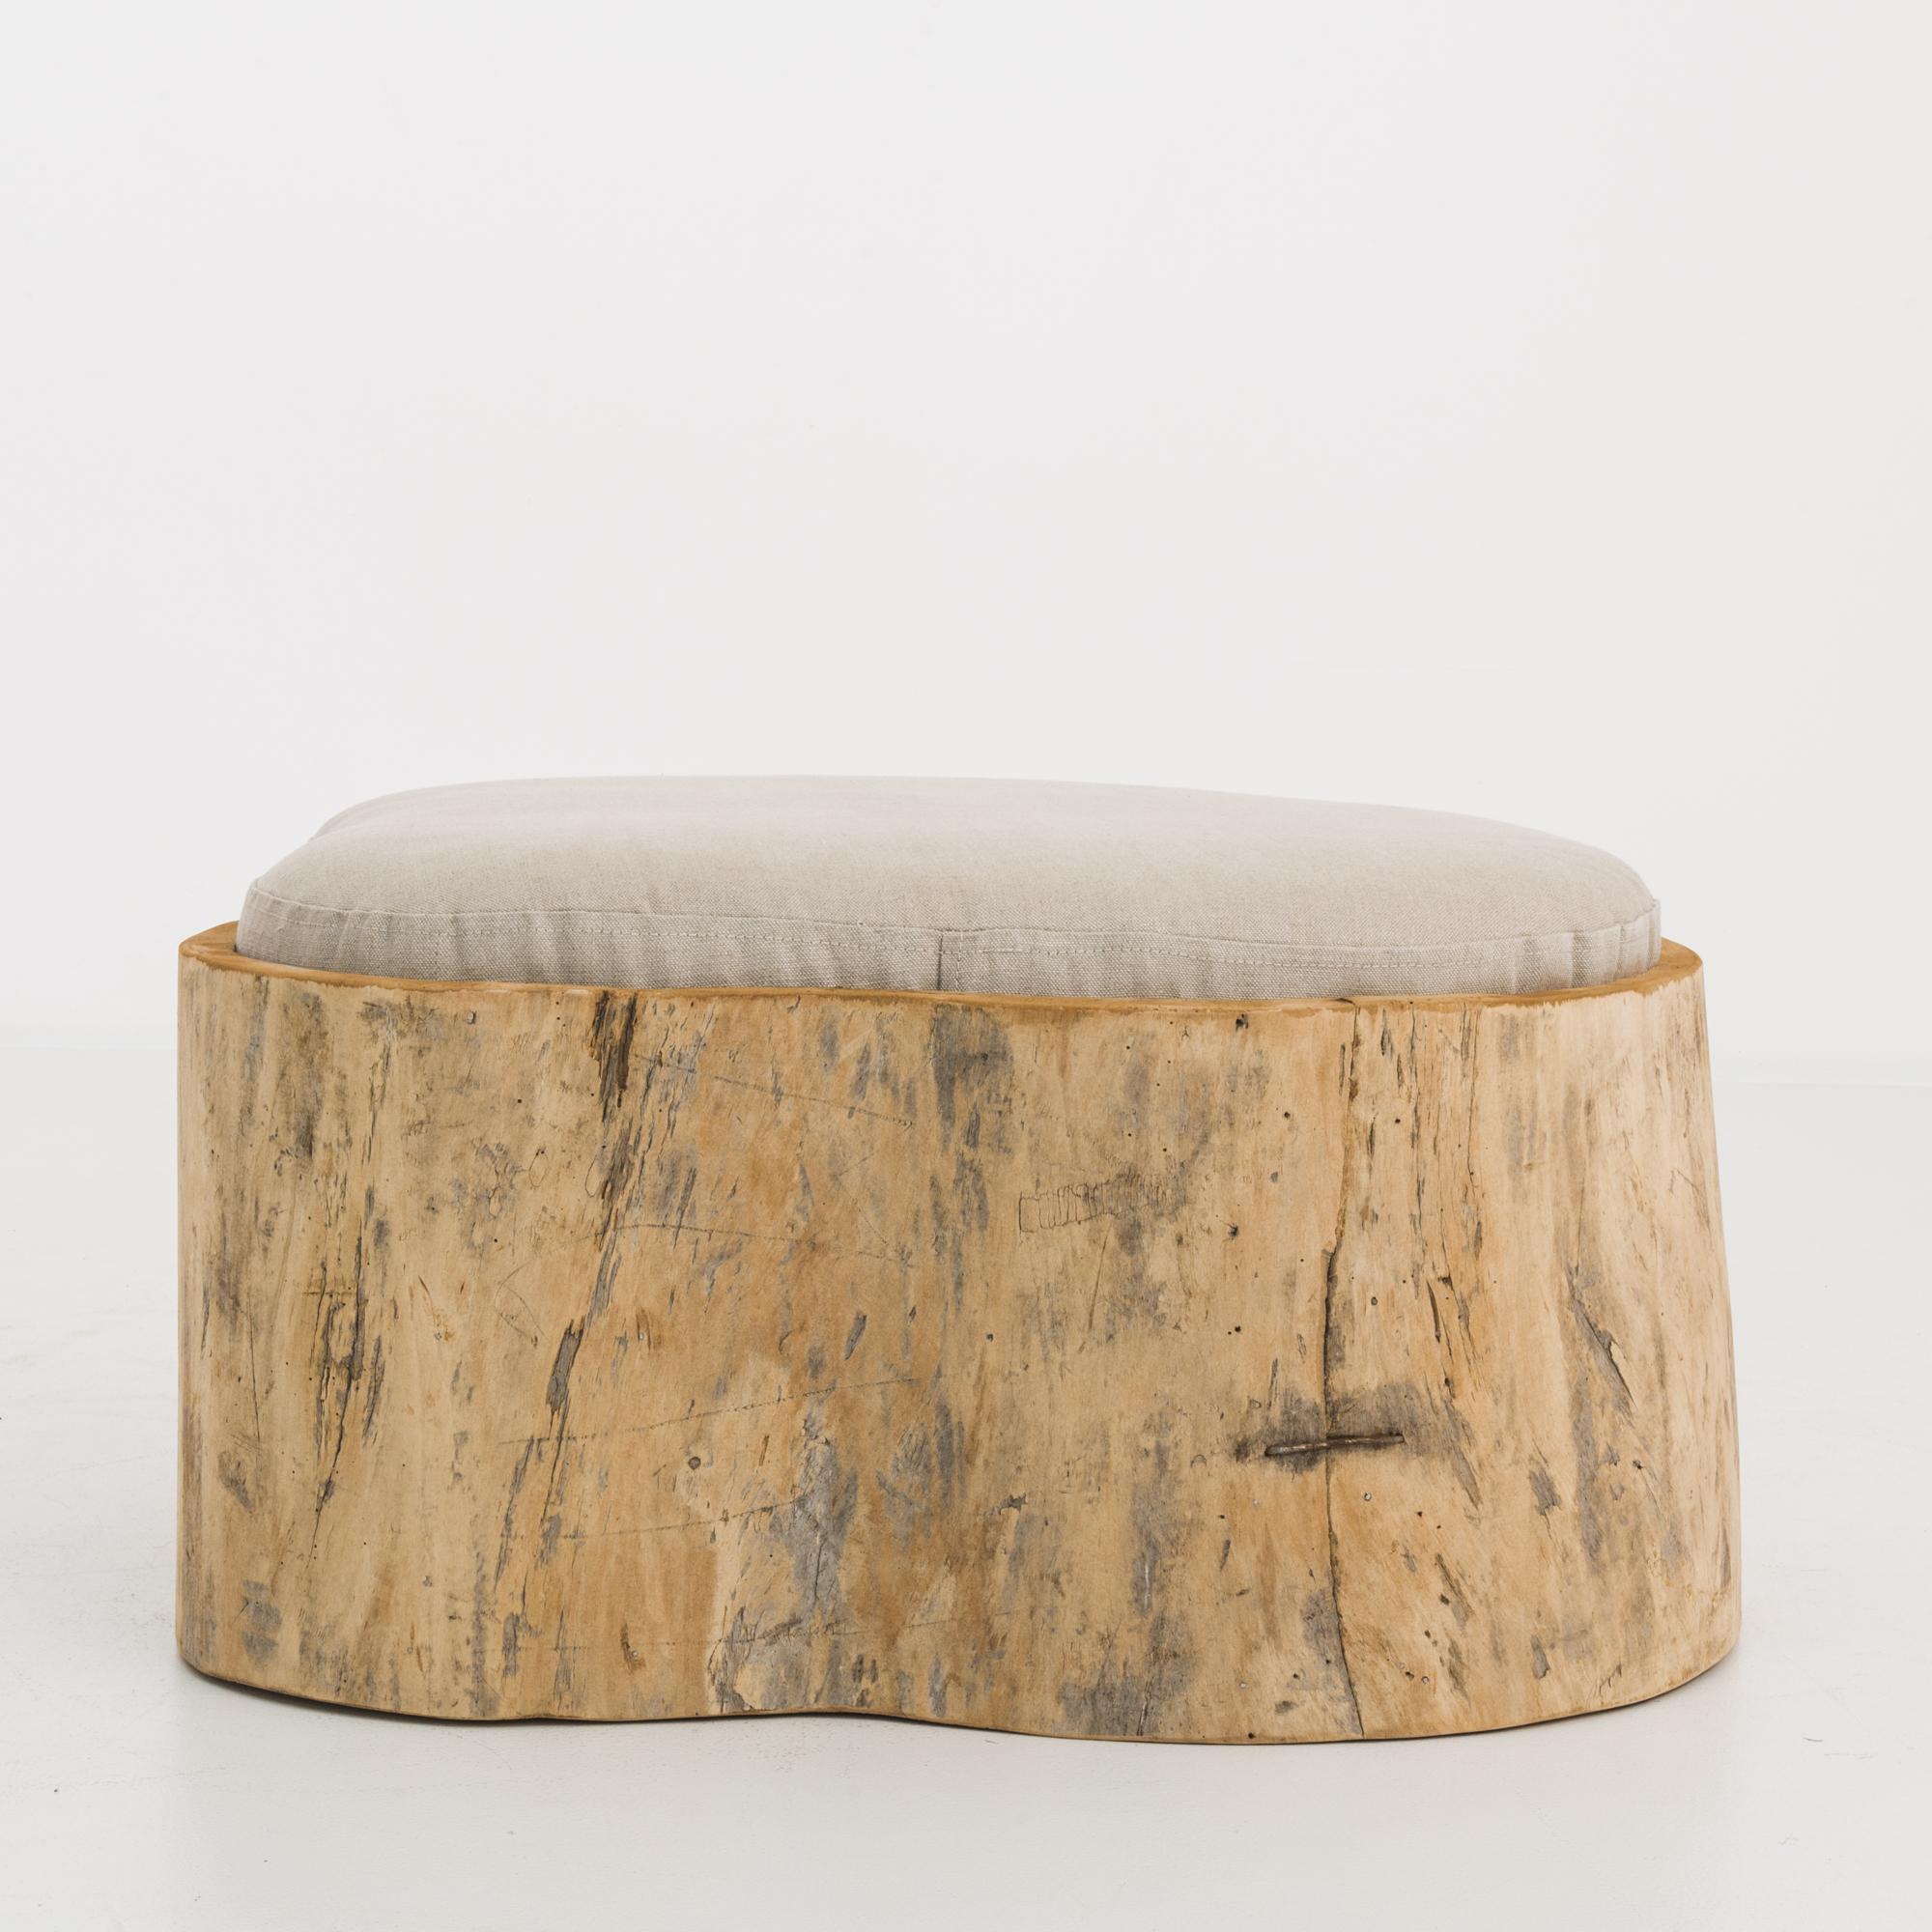 A hollowed tree trunk from Poland, circa 1800 fashioned into an elegant wooden pou. The natural contours of the stump create a unique shape, while the organic finish lends a rustic textural appeal. The cushion is upholstered in a taupe linen fabric,